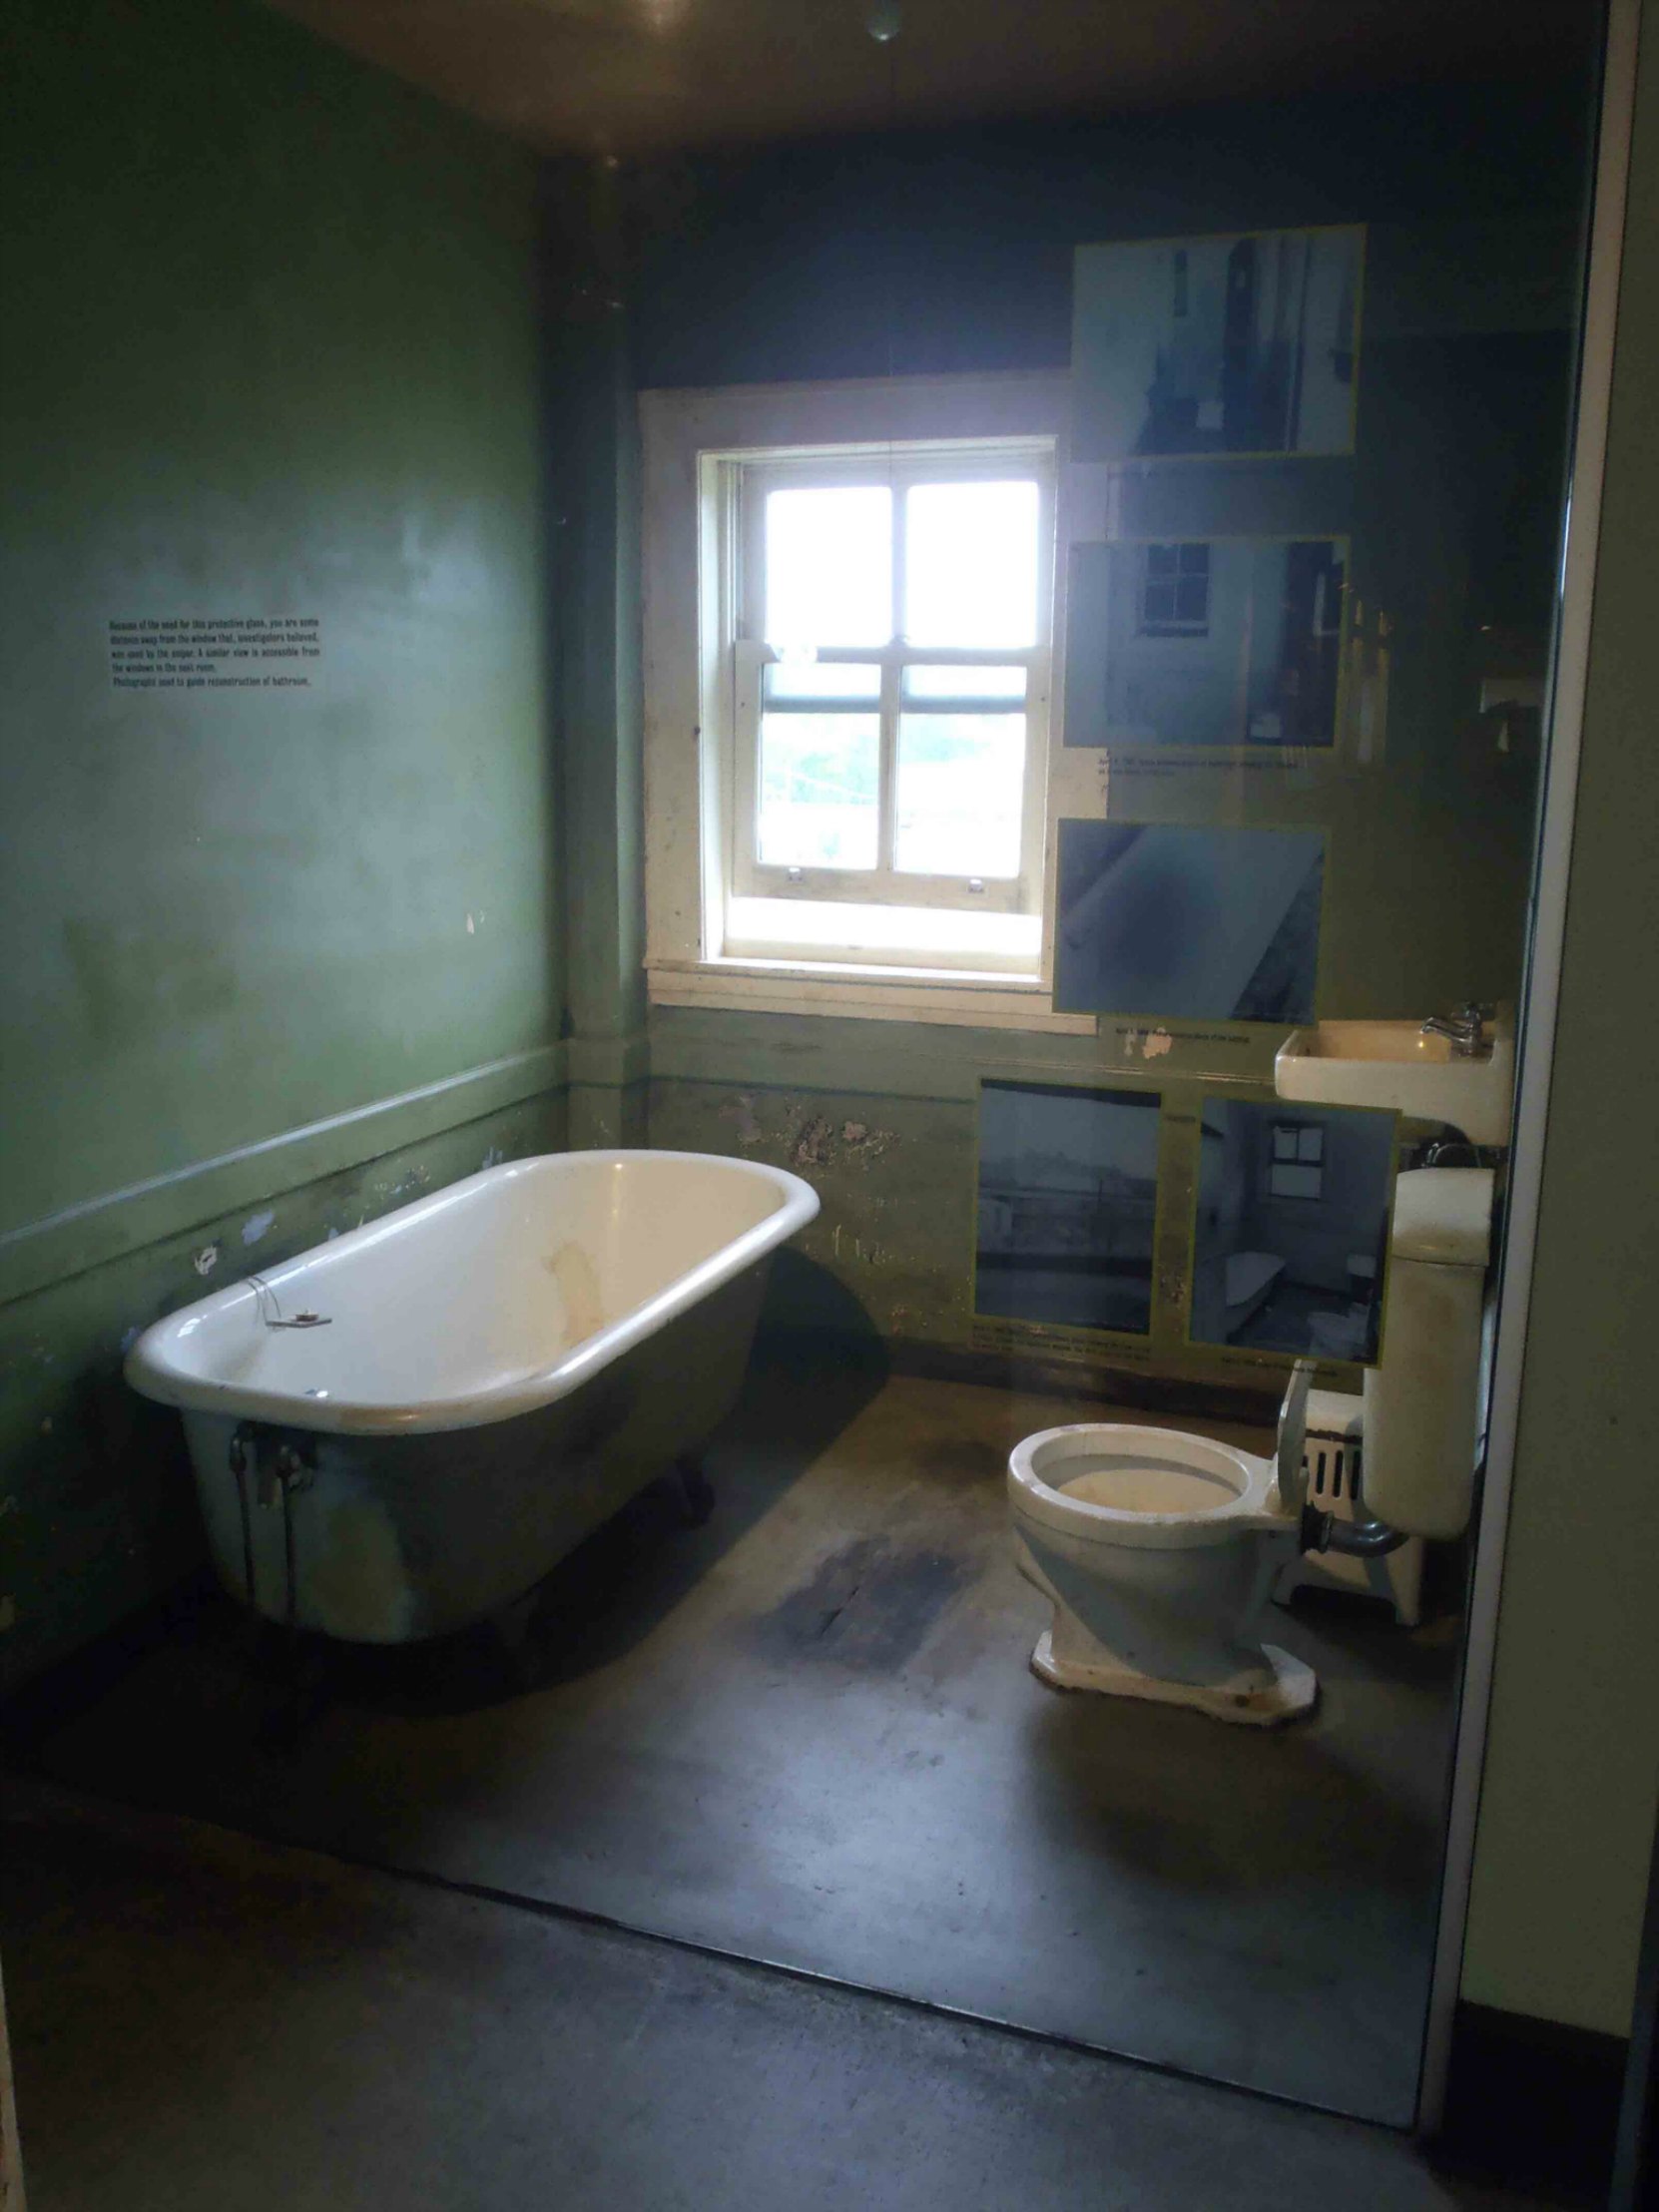 The rooming house washroom from which James Earl Ray shot Dr. Martin Luther King Jr. The rooming house is now part of the National Civil Rights Museum and this bathroom is part of the museum's permanent display.